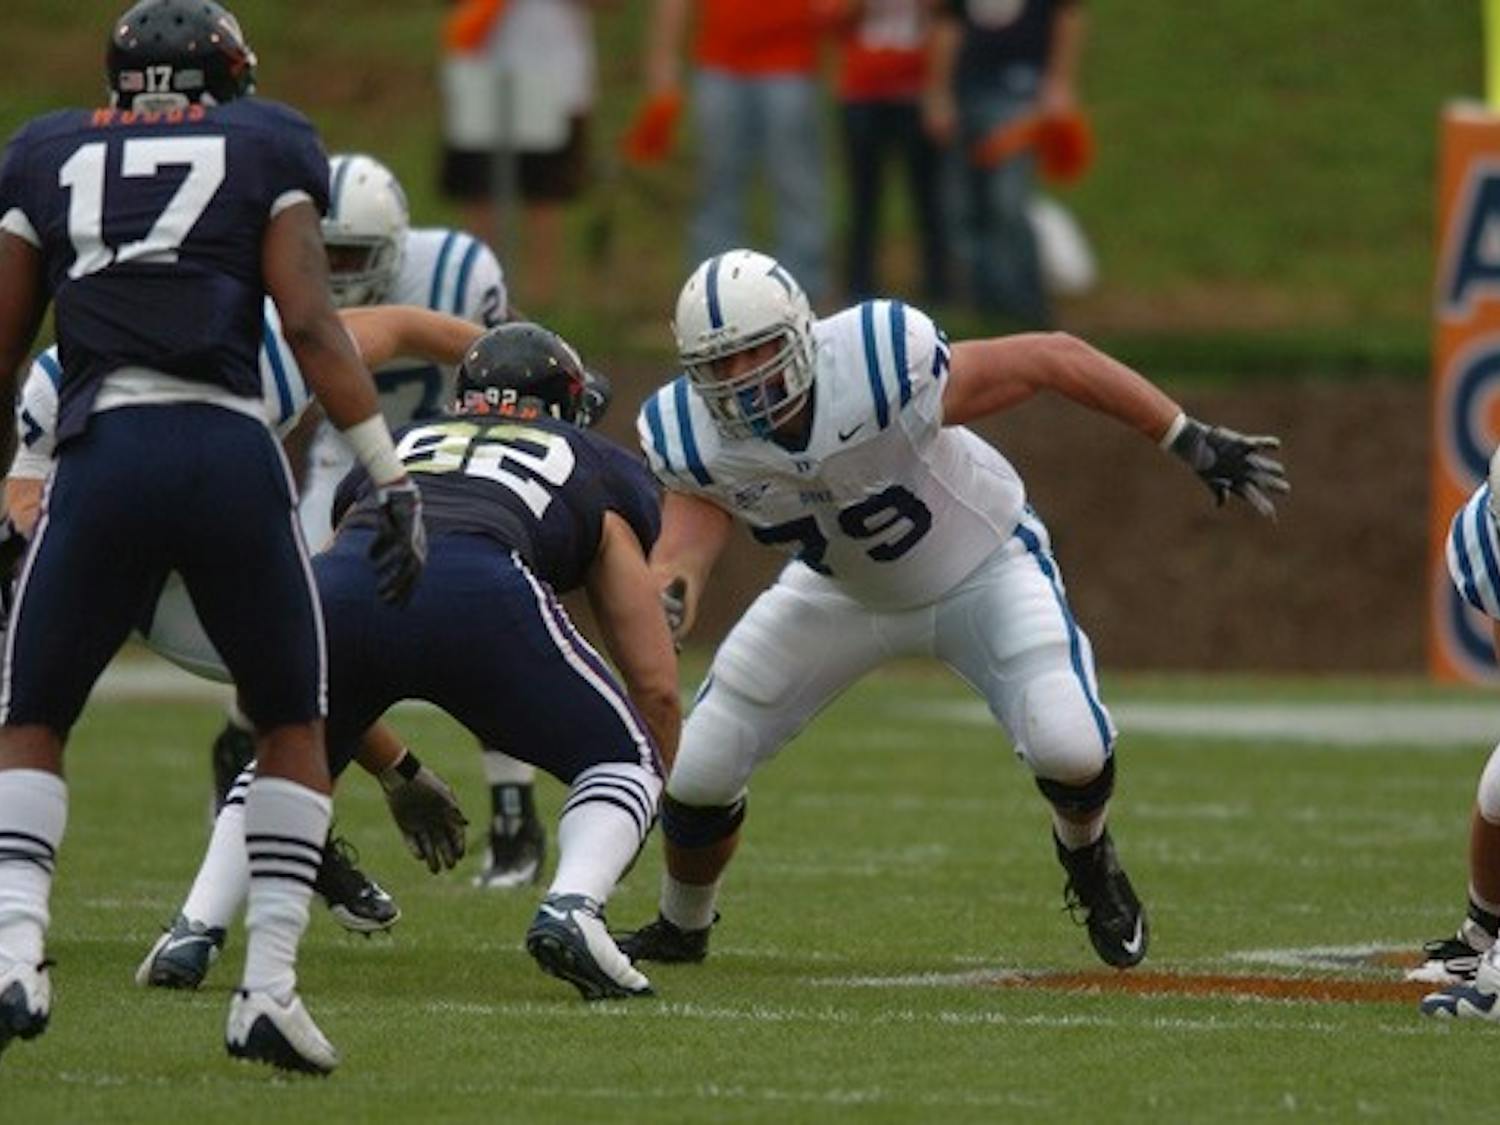 Duke’s offensive line is smaller than most of the defensive fronts it faces but has held its own for much of the year.